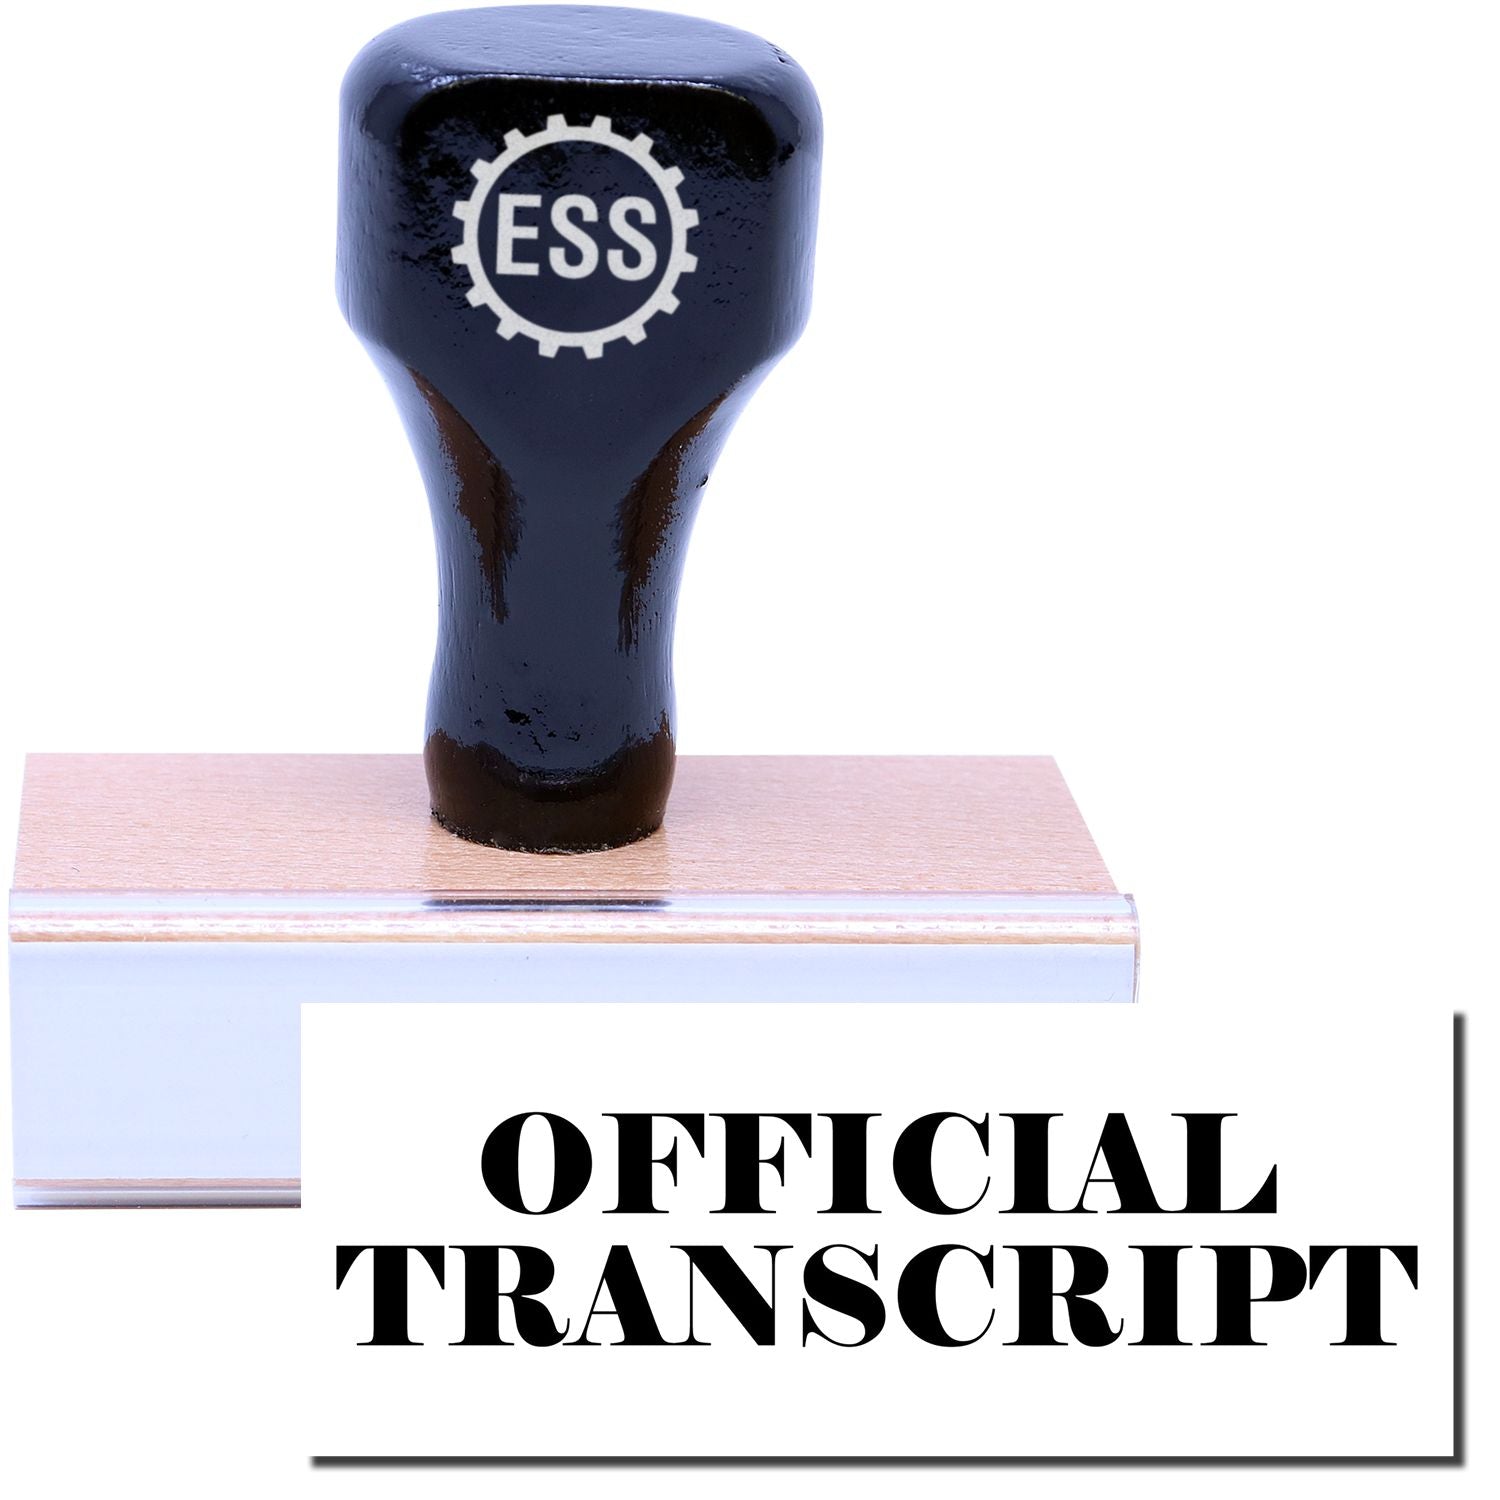 A stock office rubber stamp with a stamped image showing how the text "OFFICIAL TRANSCRIPT" is displayed after stamping.